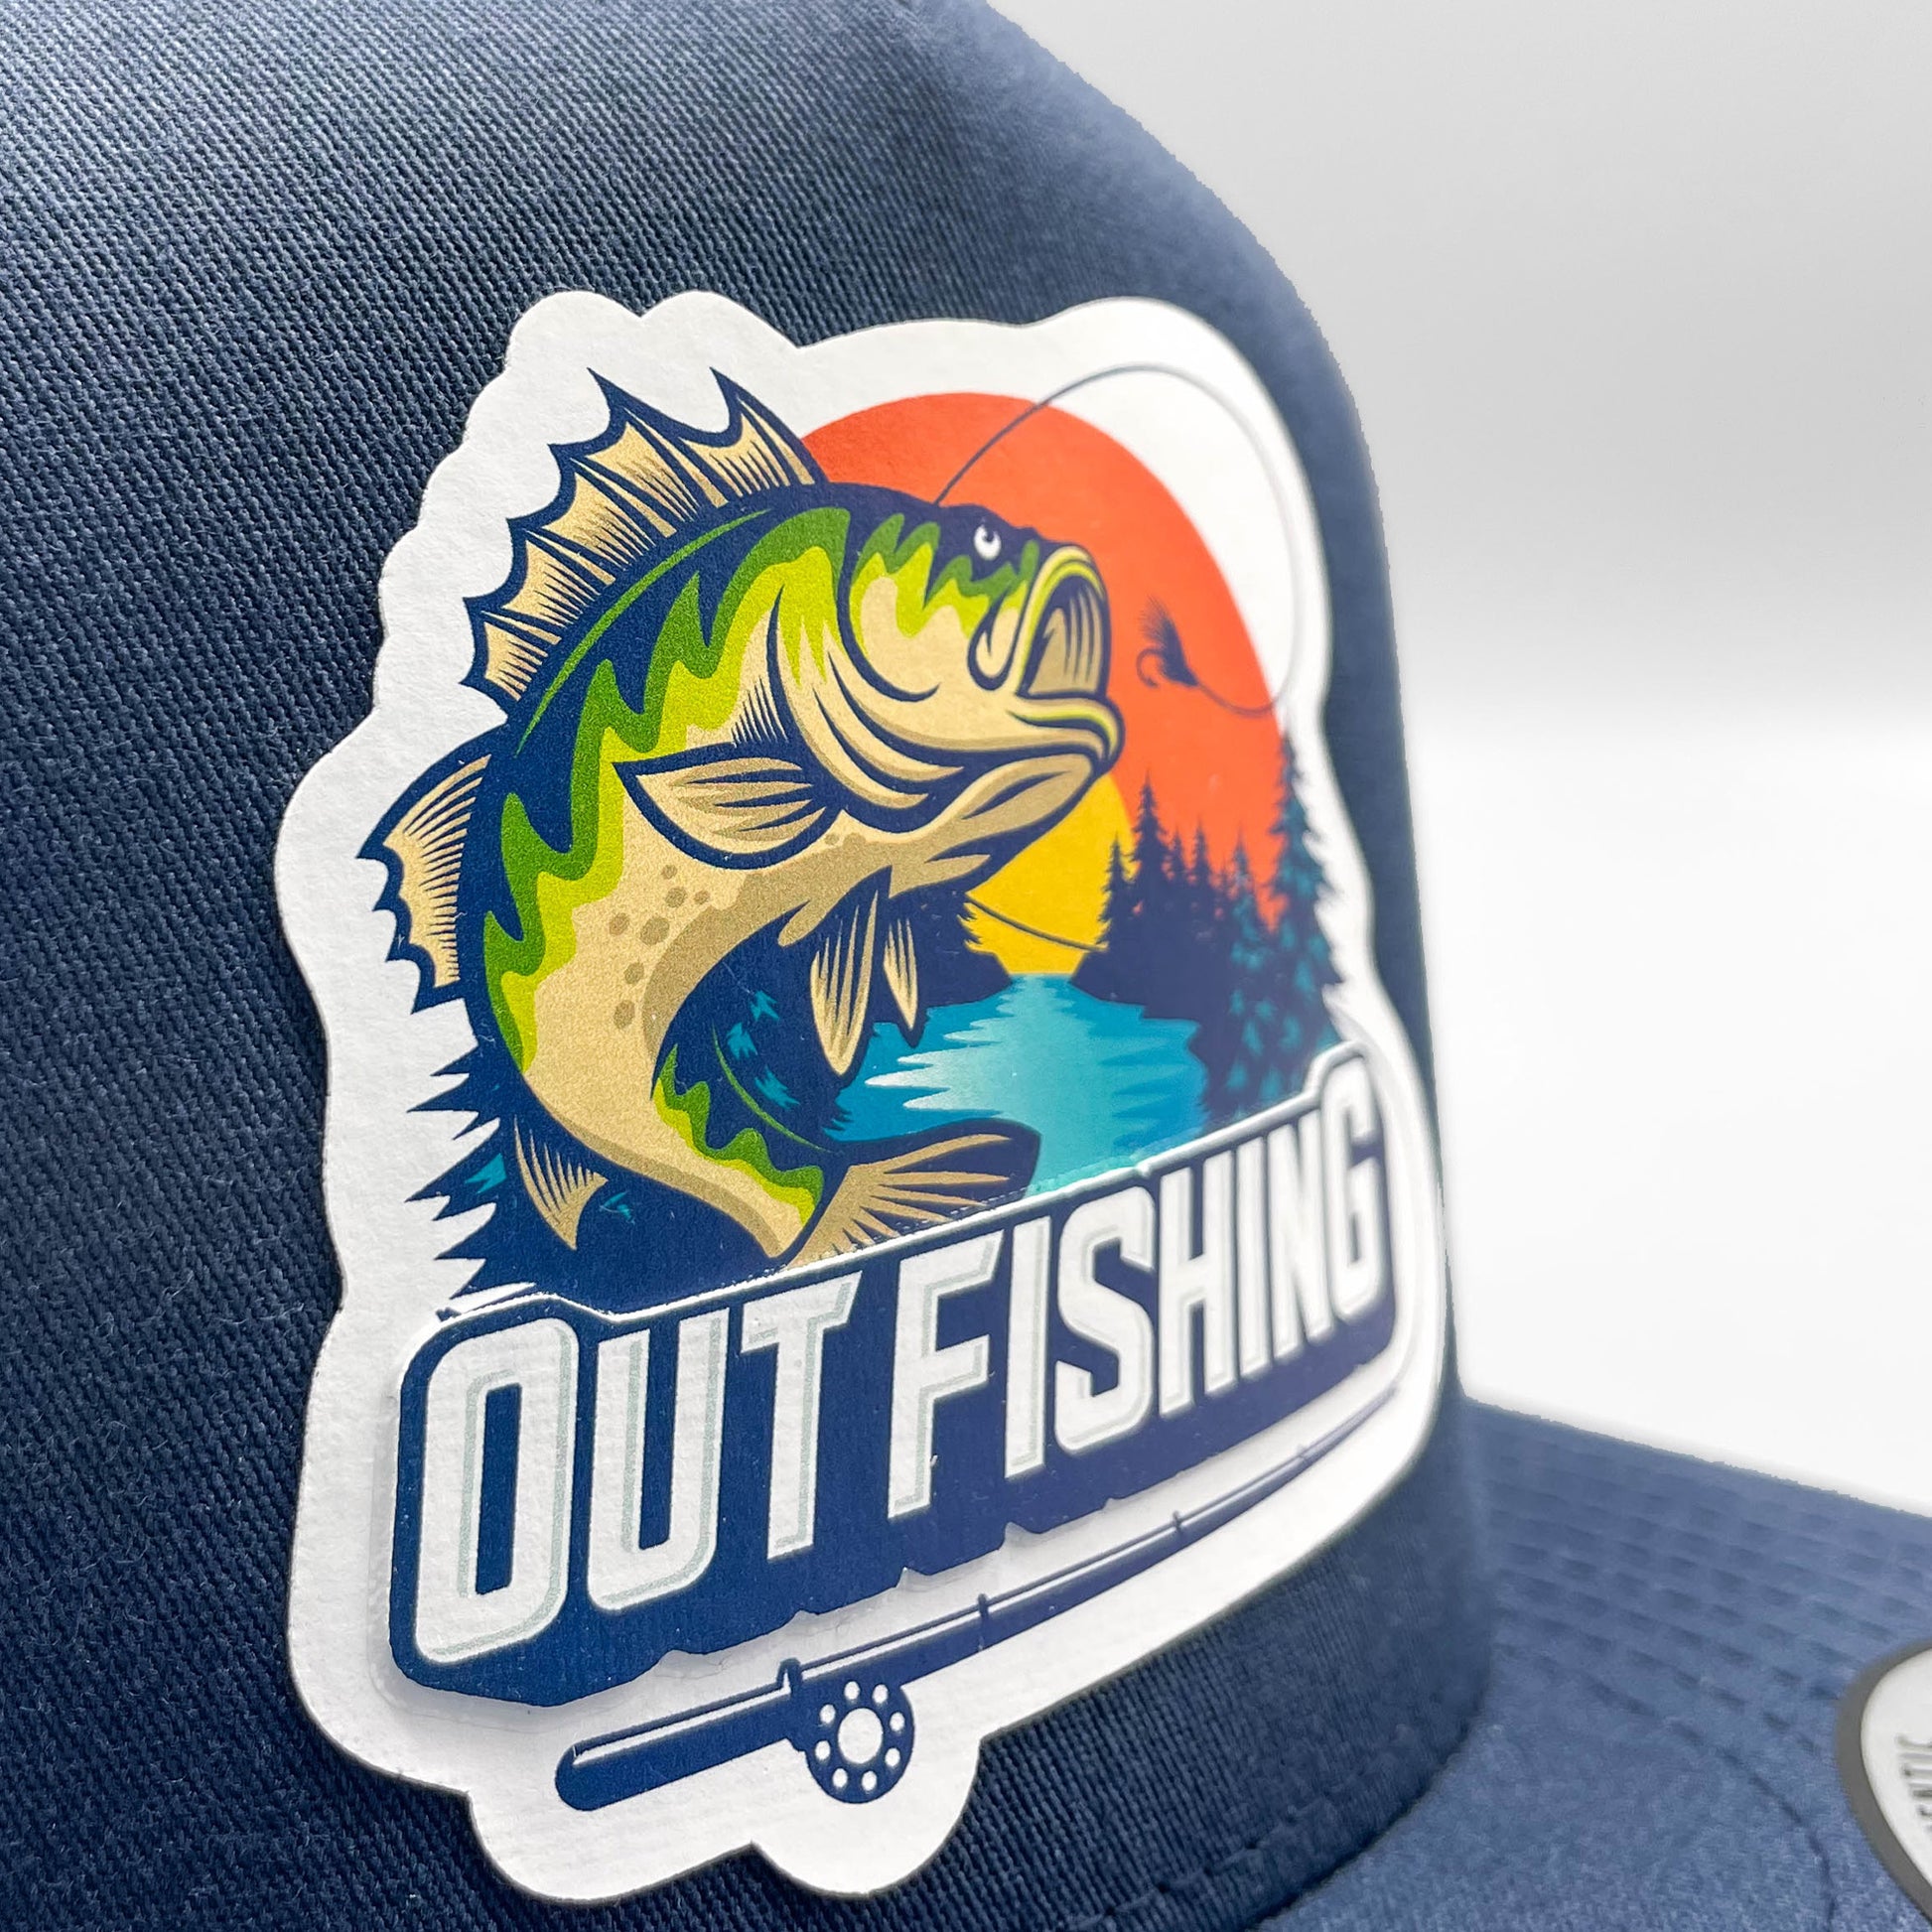 Out Bass Fishing Retro Trucker Hat, Raised Design on Navy Yupoong 6006 –  Vintage Truckers